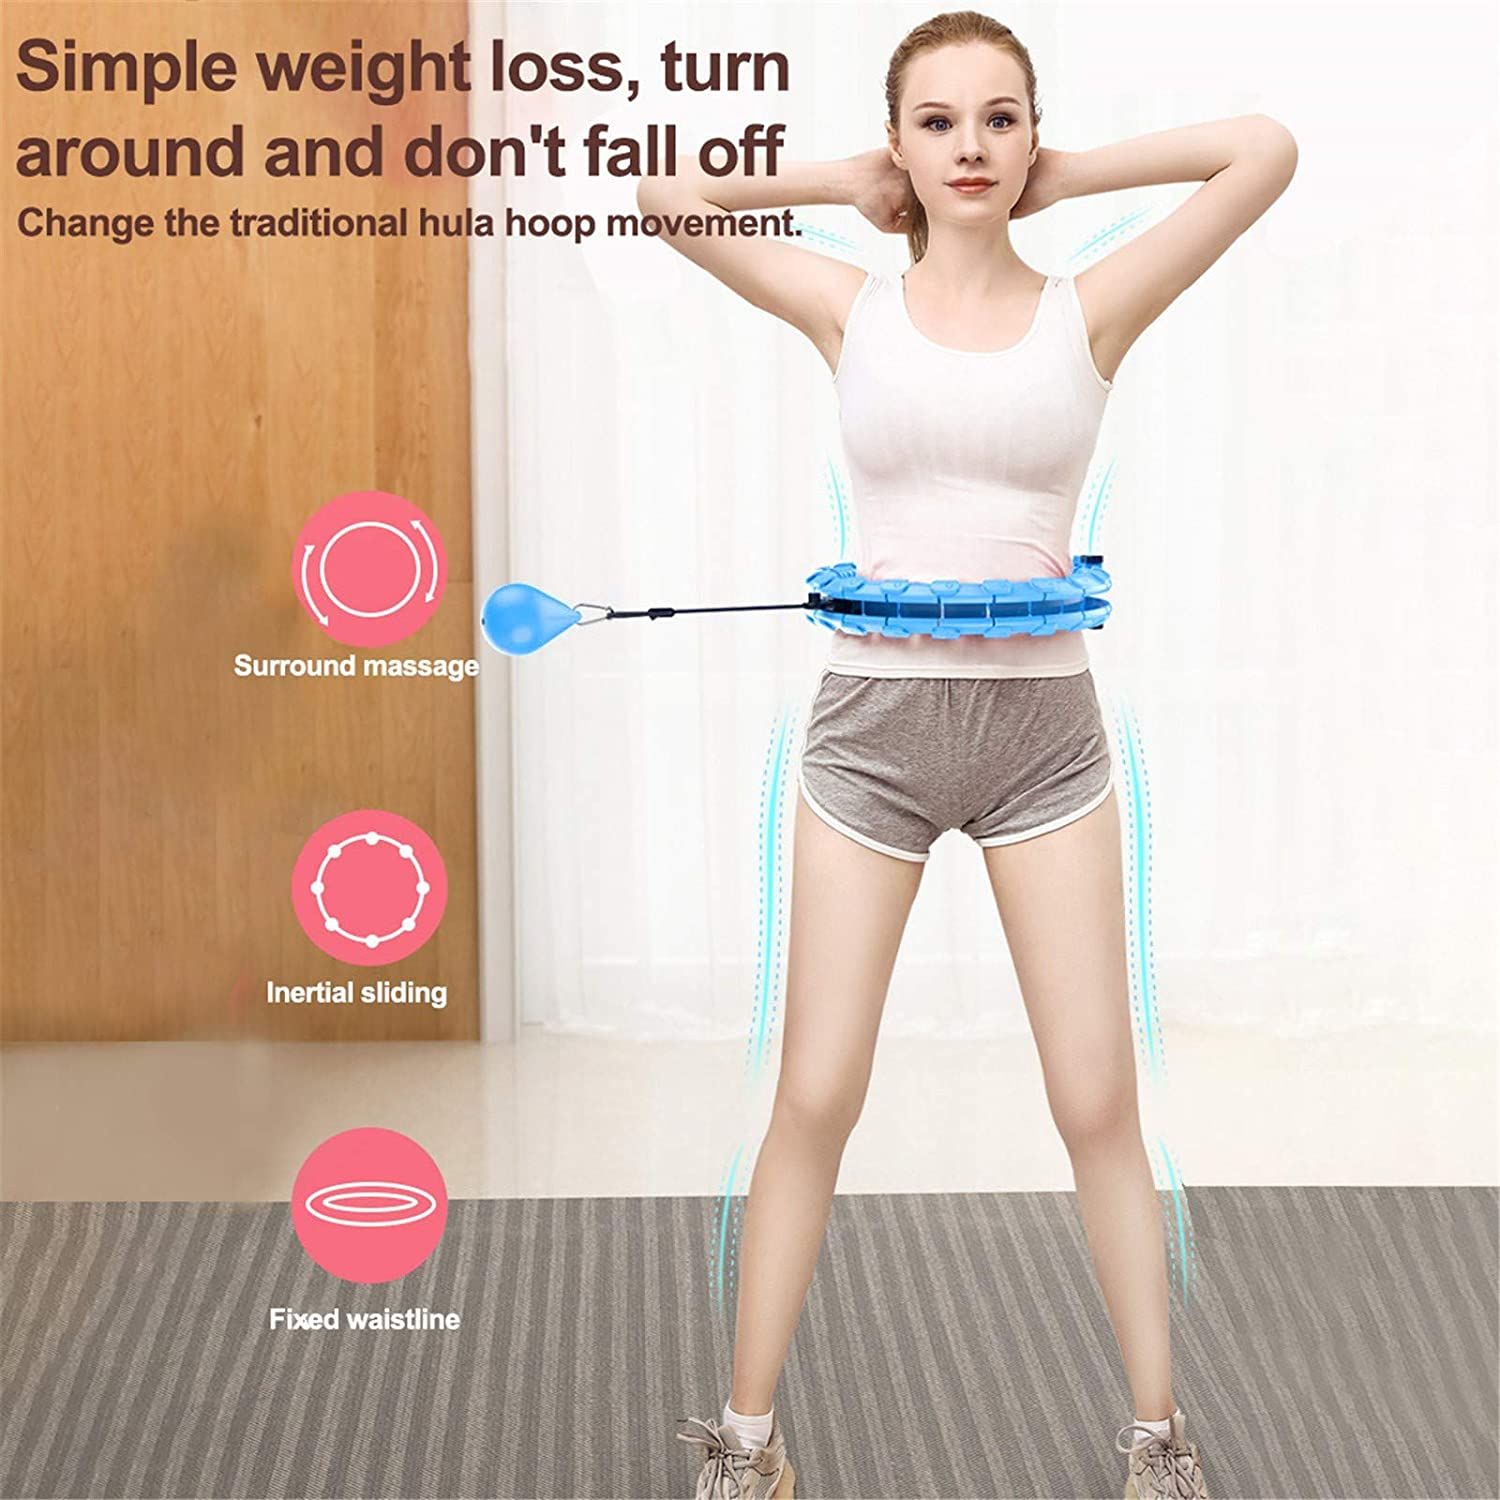 LPro Smart Hoola Fitness Hoops for Adults Kids Weight Loss 2 in 1 Abdomen Exercise Massage 24 Detachable Knots Adjustable 